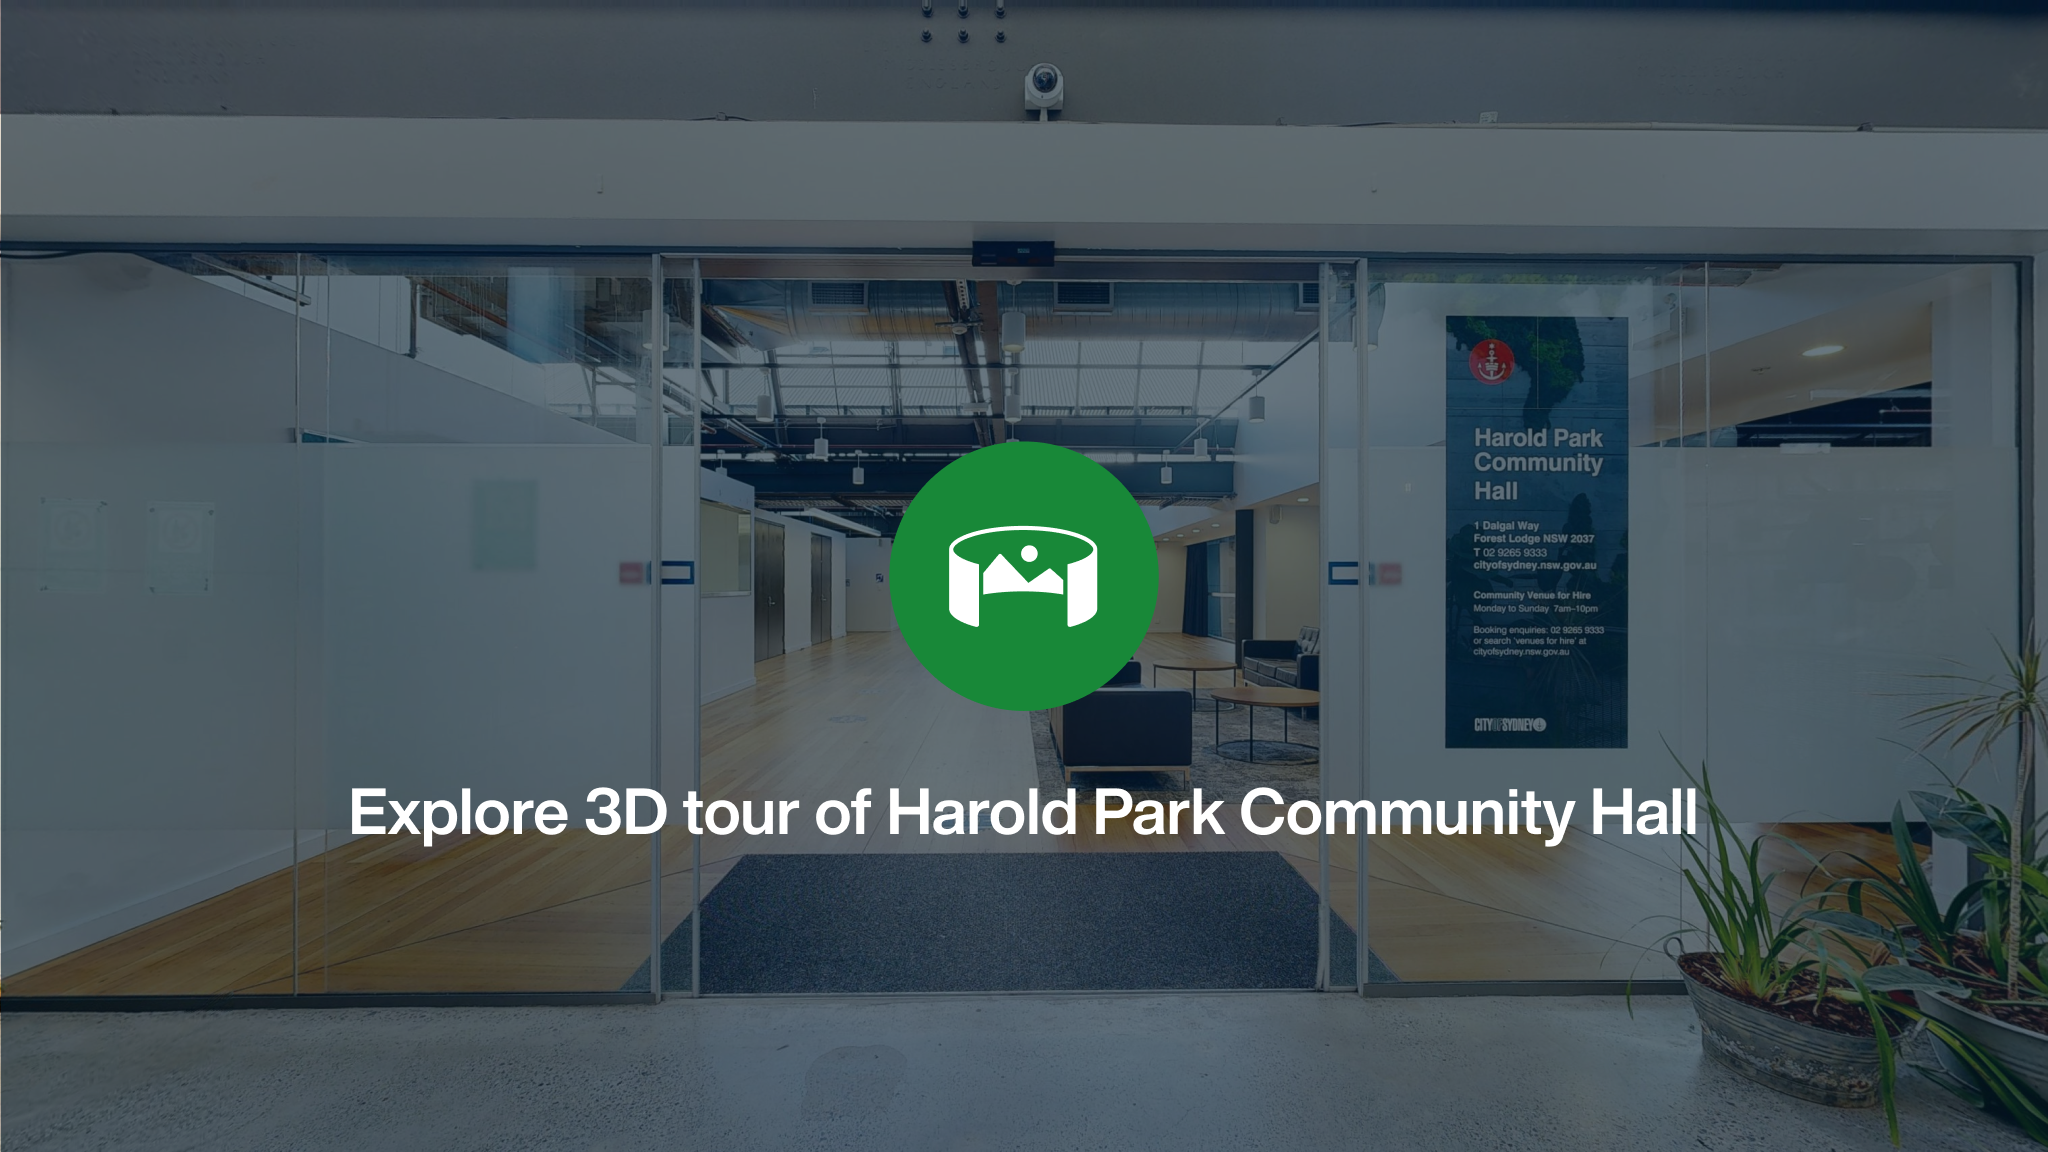 The front entrance to Harold Park Community Hall overlayed with a green icon and the words Explore 3D tour of Harold Park Community Hall.